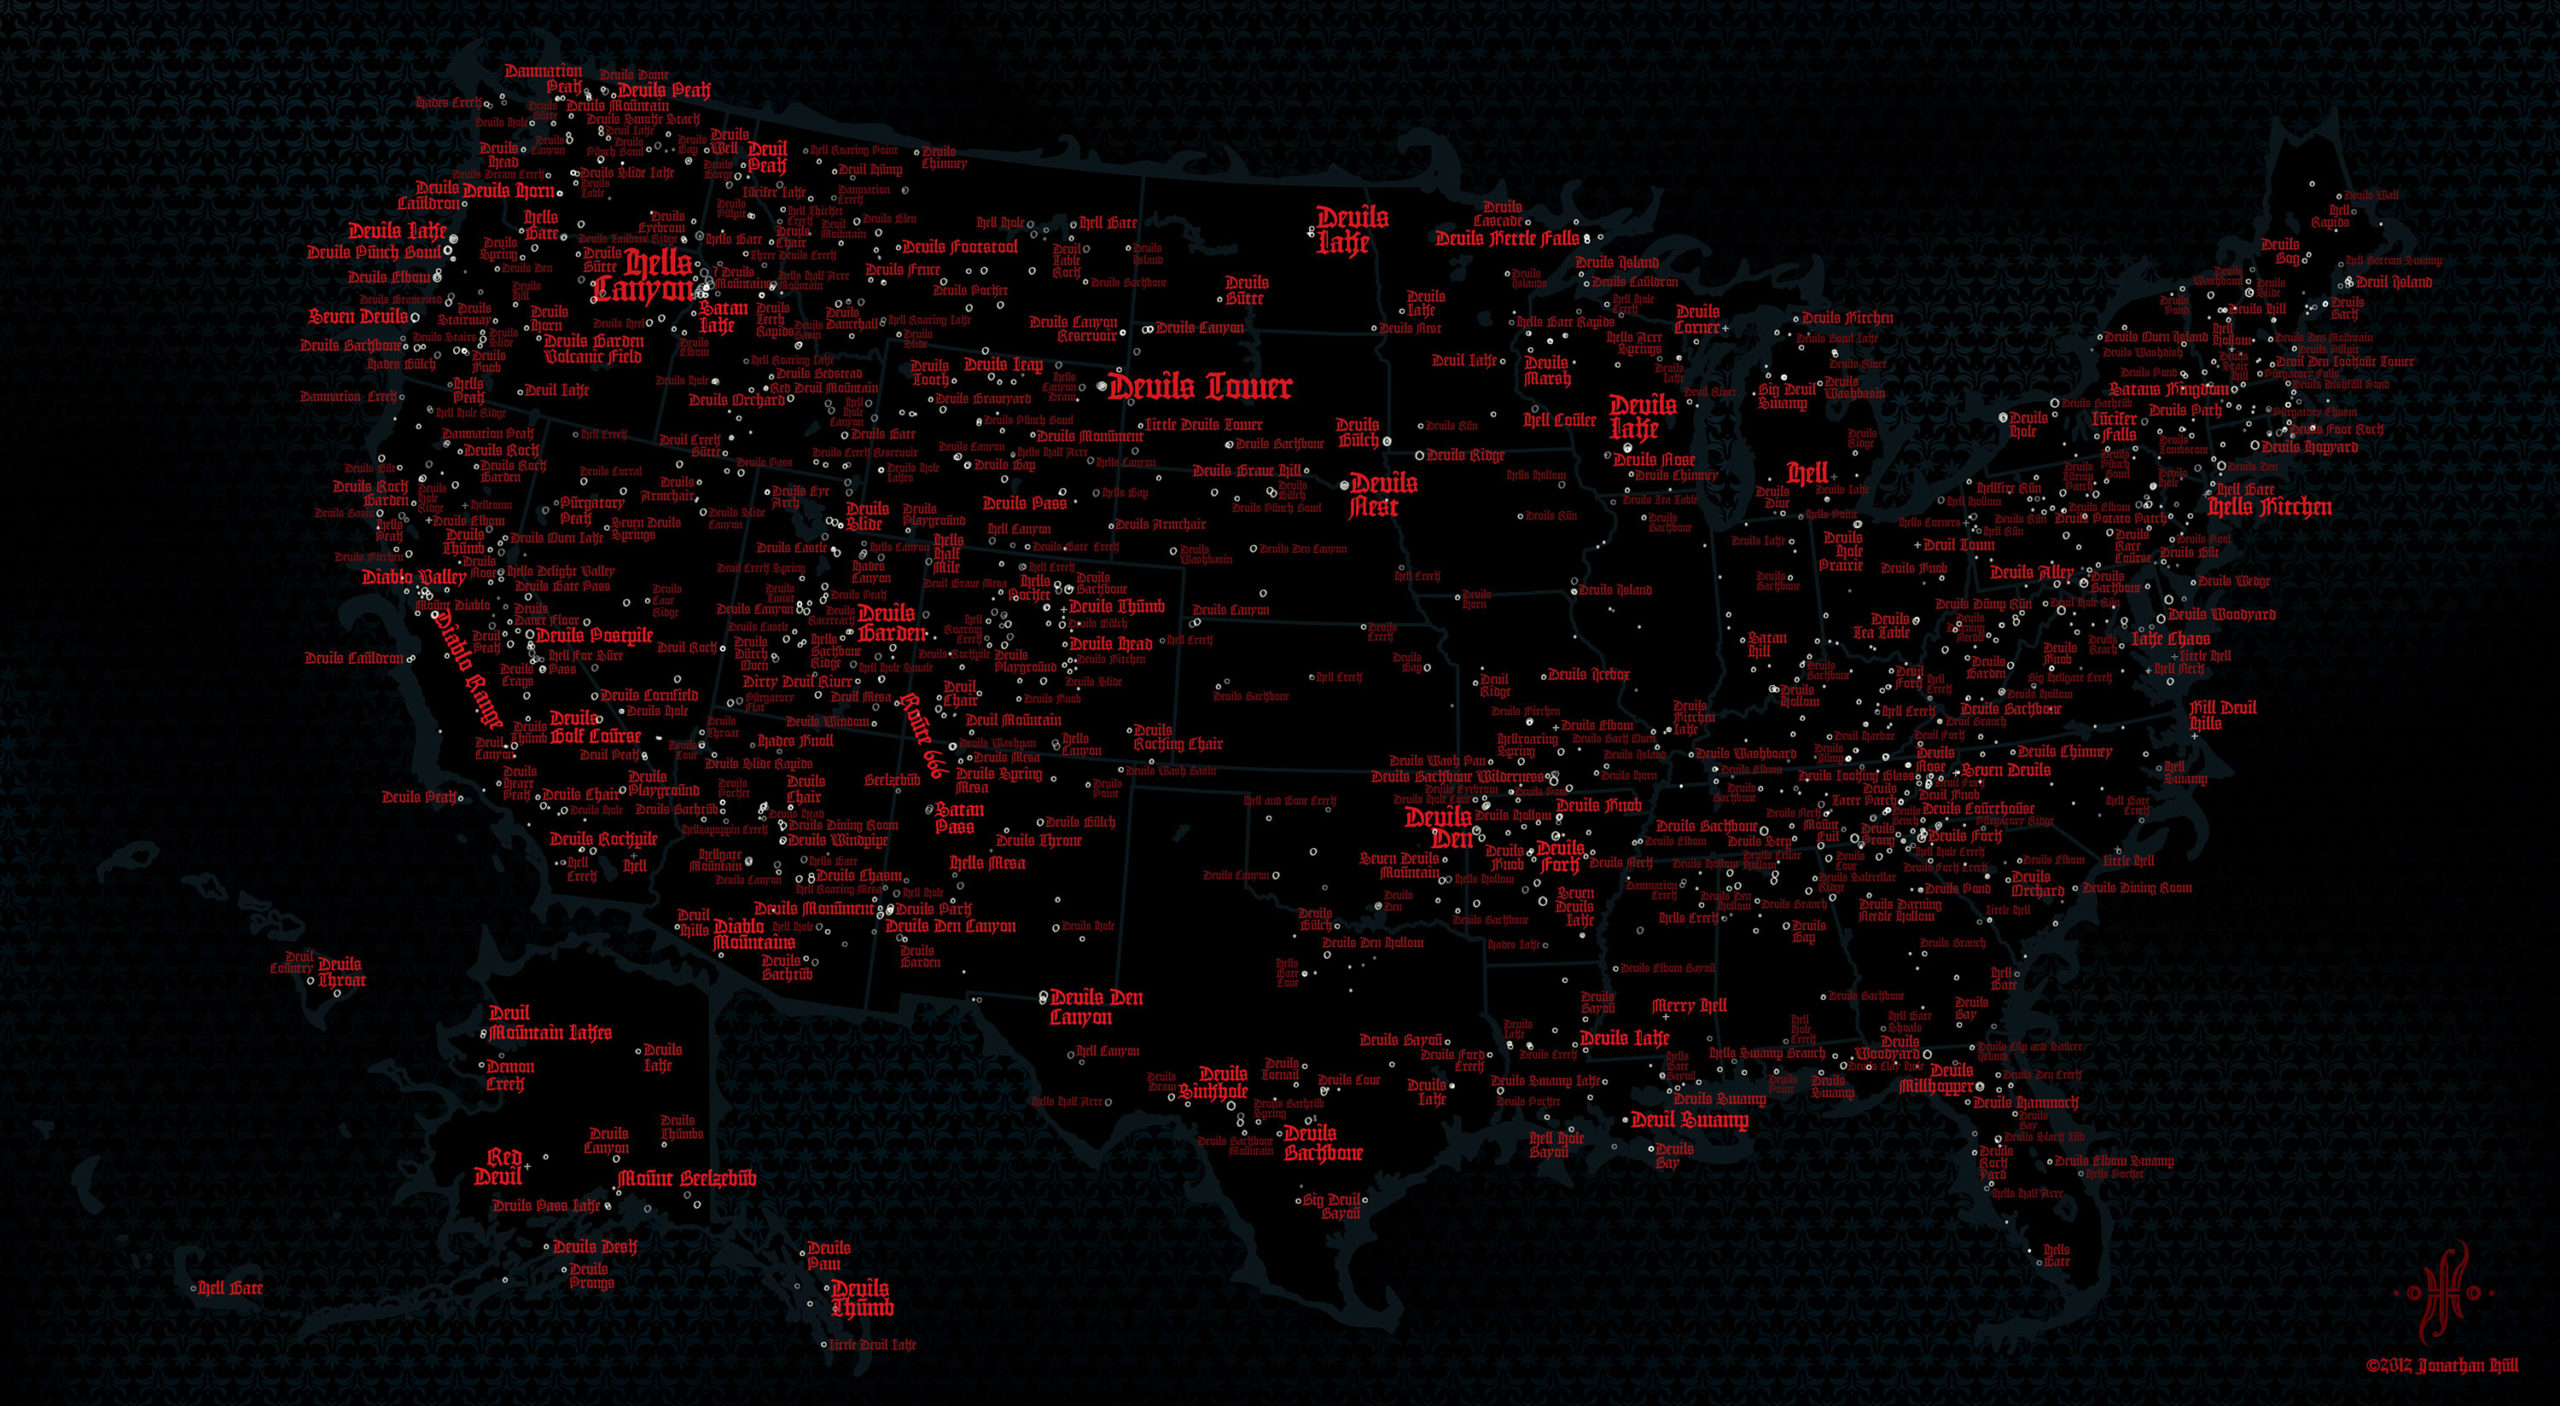 Hail Satan: A Map Of All The Places In The US Named After The Devil Himself